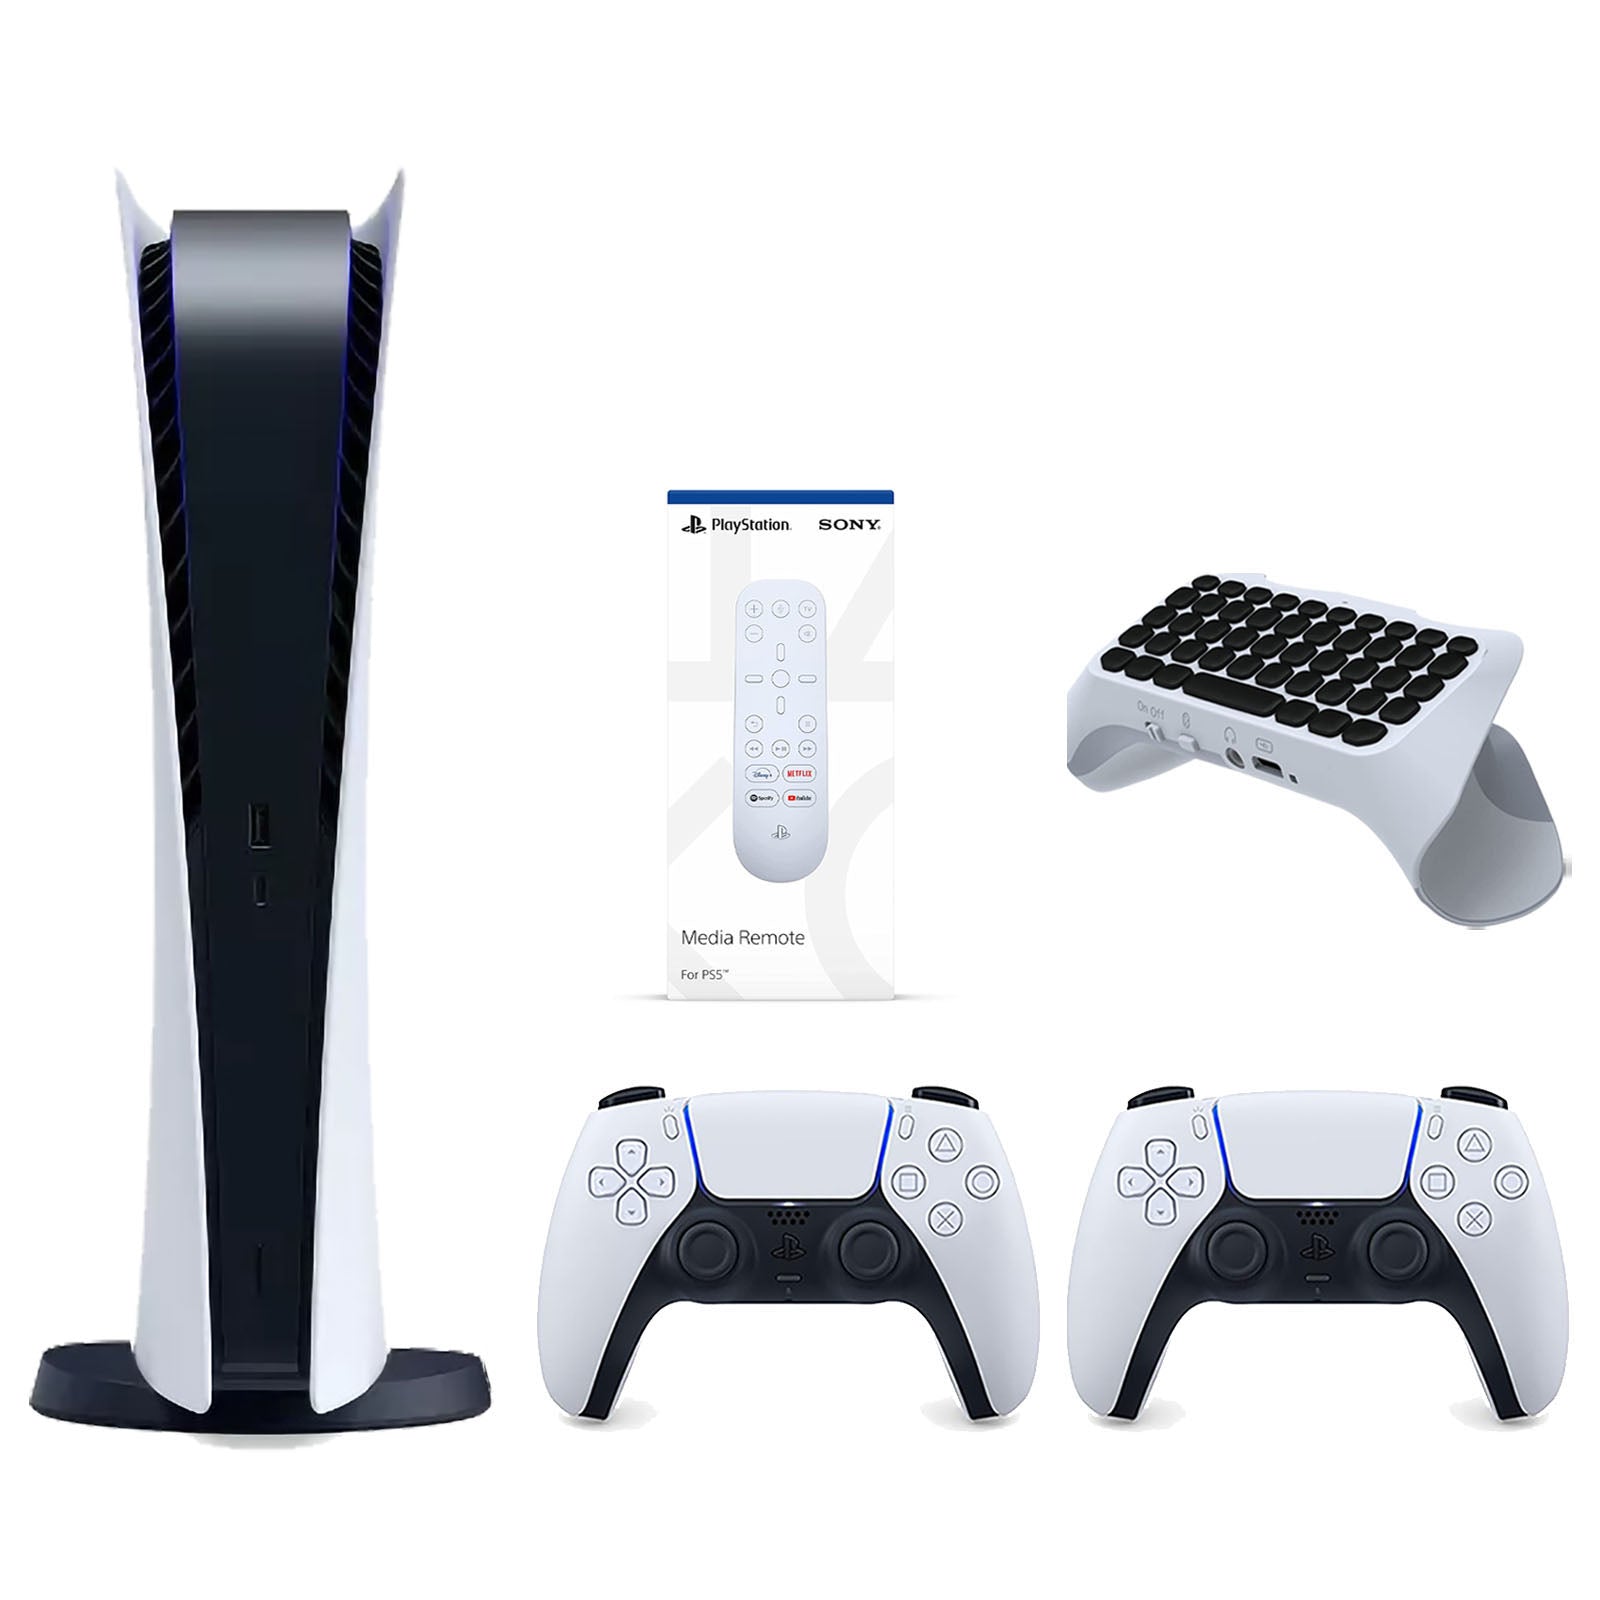 Sony Playstation 5 Digital Edition Console with Extra White Controller, Media Remote and Surge QuickType 2.0 Wireless PS5 Controller Keypad Bundle - Pro-Distributing